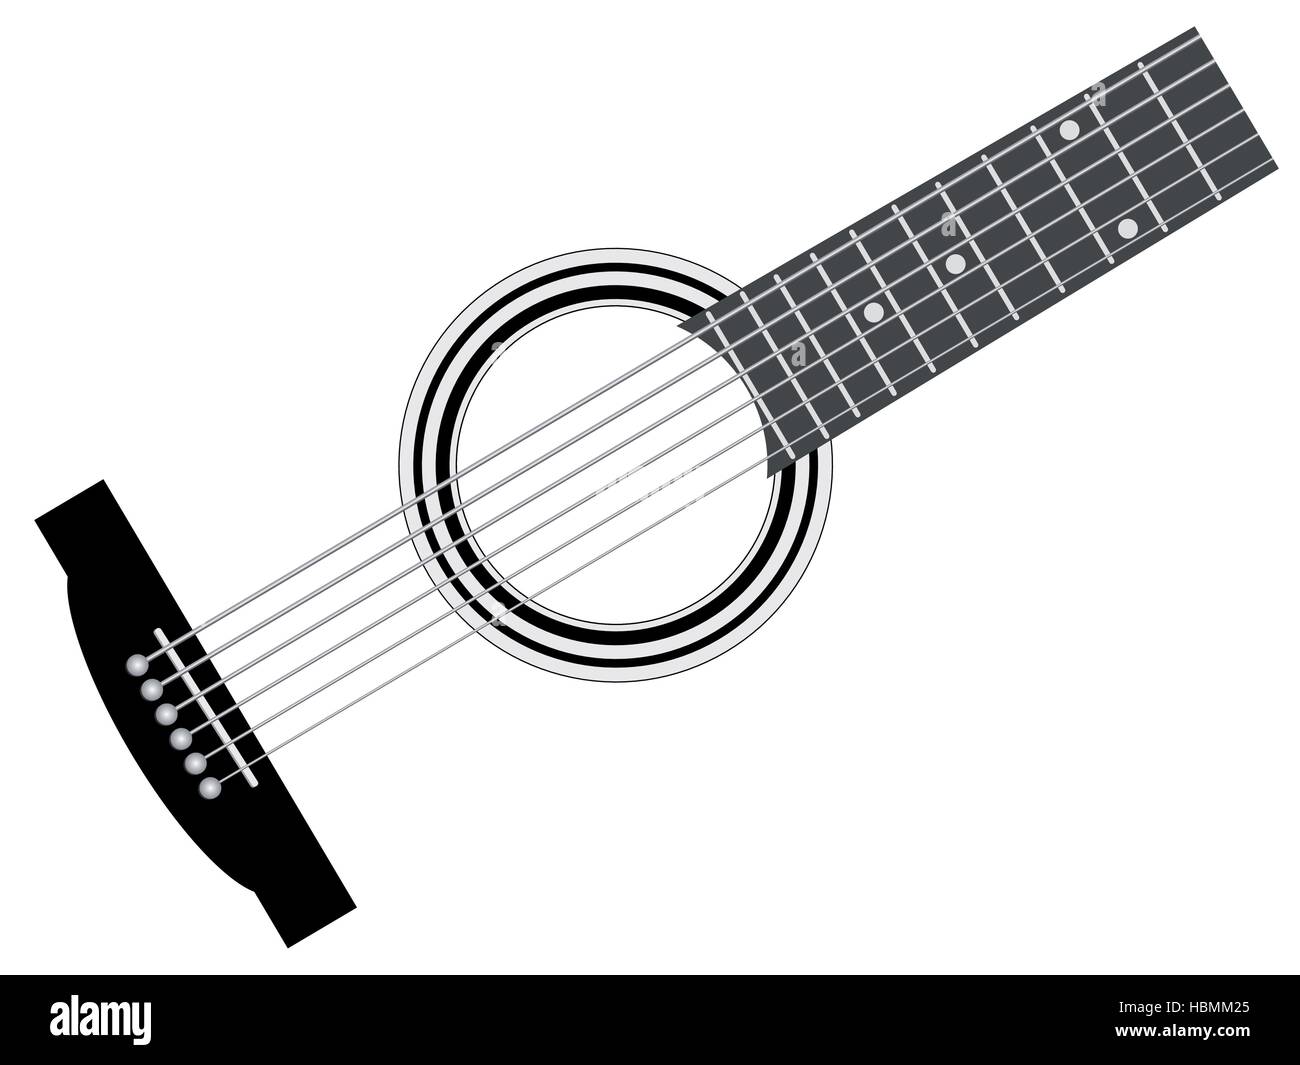 Abstract part of musical instrument - guitar - vector illustration Stock Vector